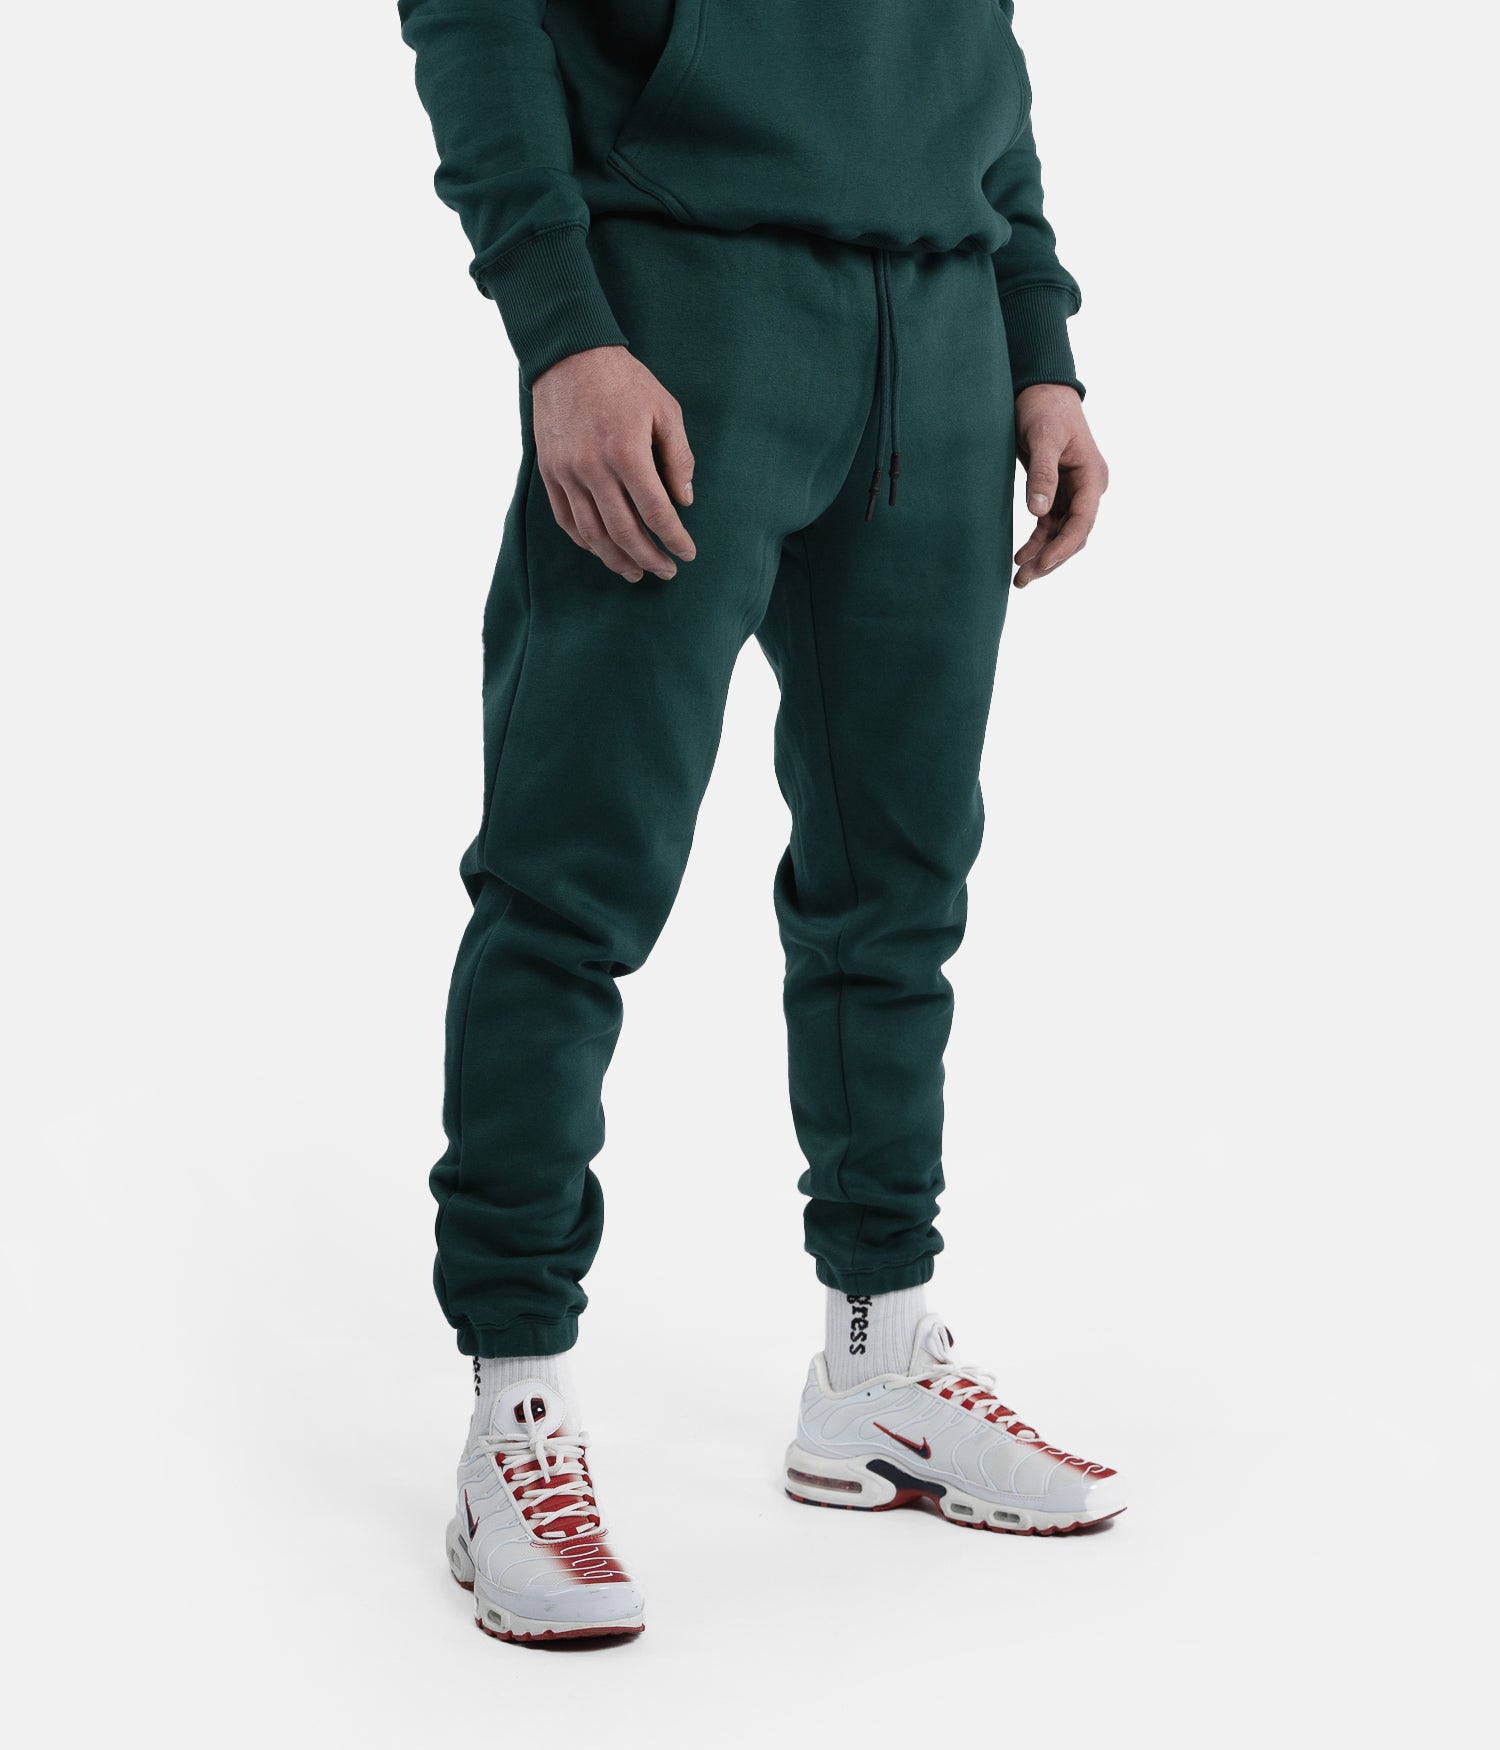 PRG Joggers - Green